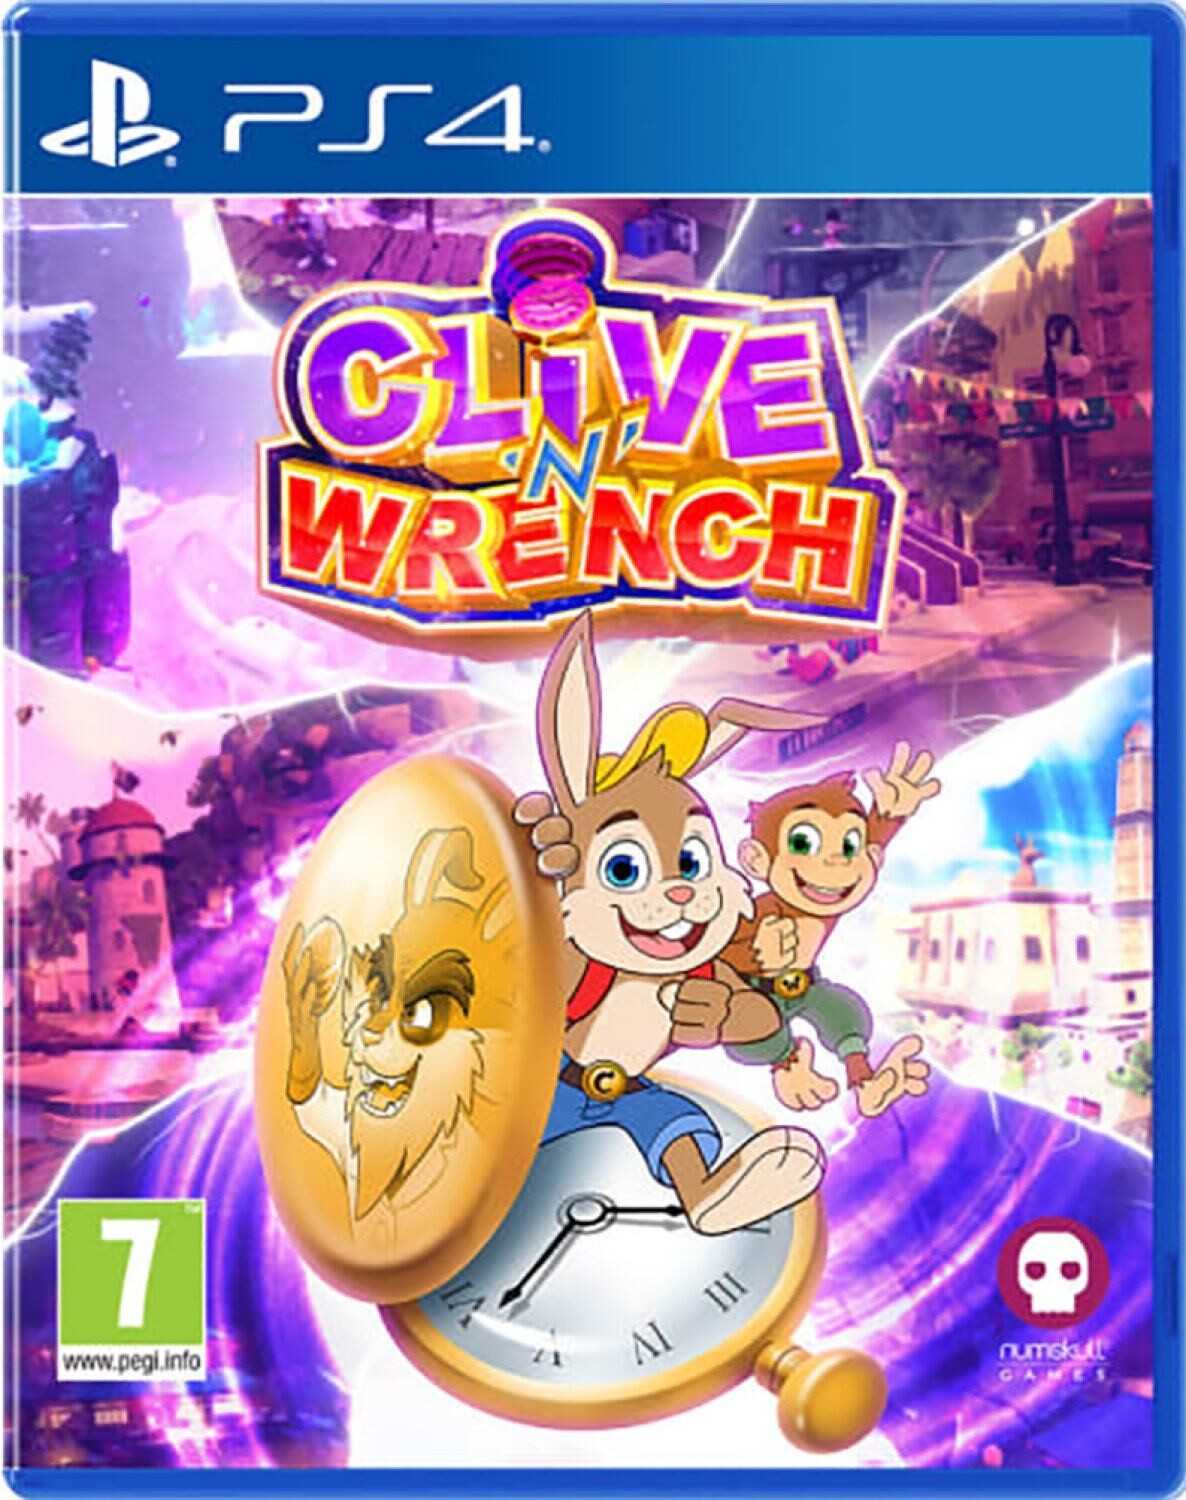 Clive 'n' Wrench - PS4